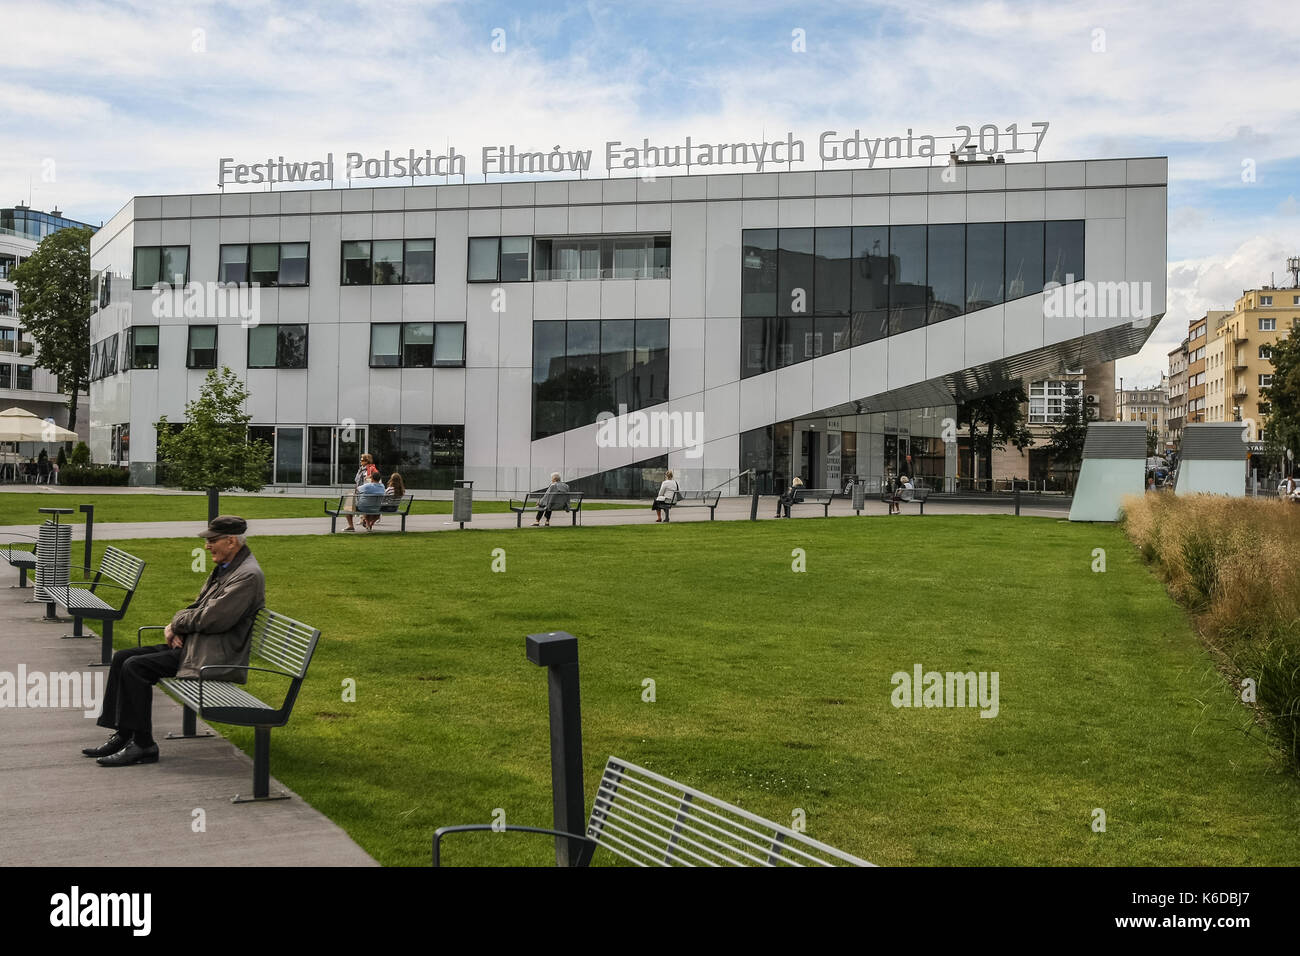 Gdynia Film Centre building is seen in Gdynia, Poland on 12 September 2017  Polish Film Festival is one of the oldest film events in Europe which promotes the Polish cinematography and is the most important Polish film event, holding the status of the national film festival, which clearly contributes to the popularisation of the film culture, the promotion of the Polish film achievements, and the establishment of the position and receipt of the Polish cinematography. Stock Photo